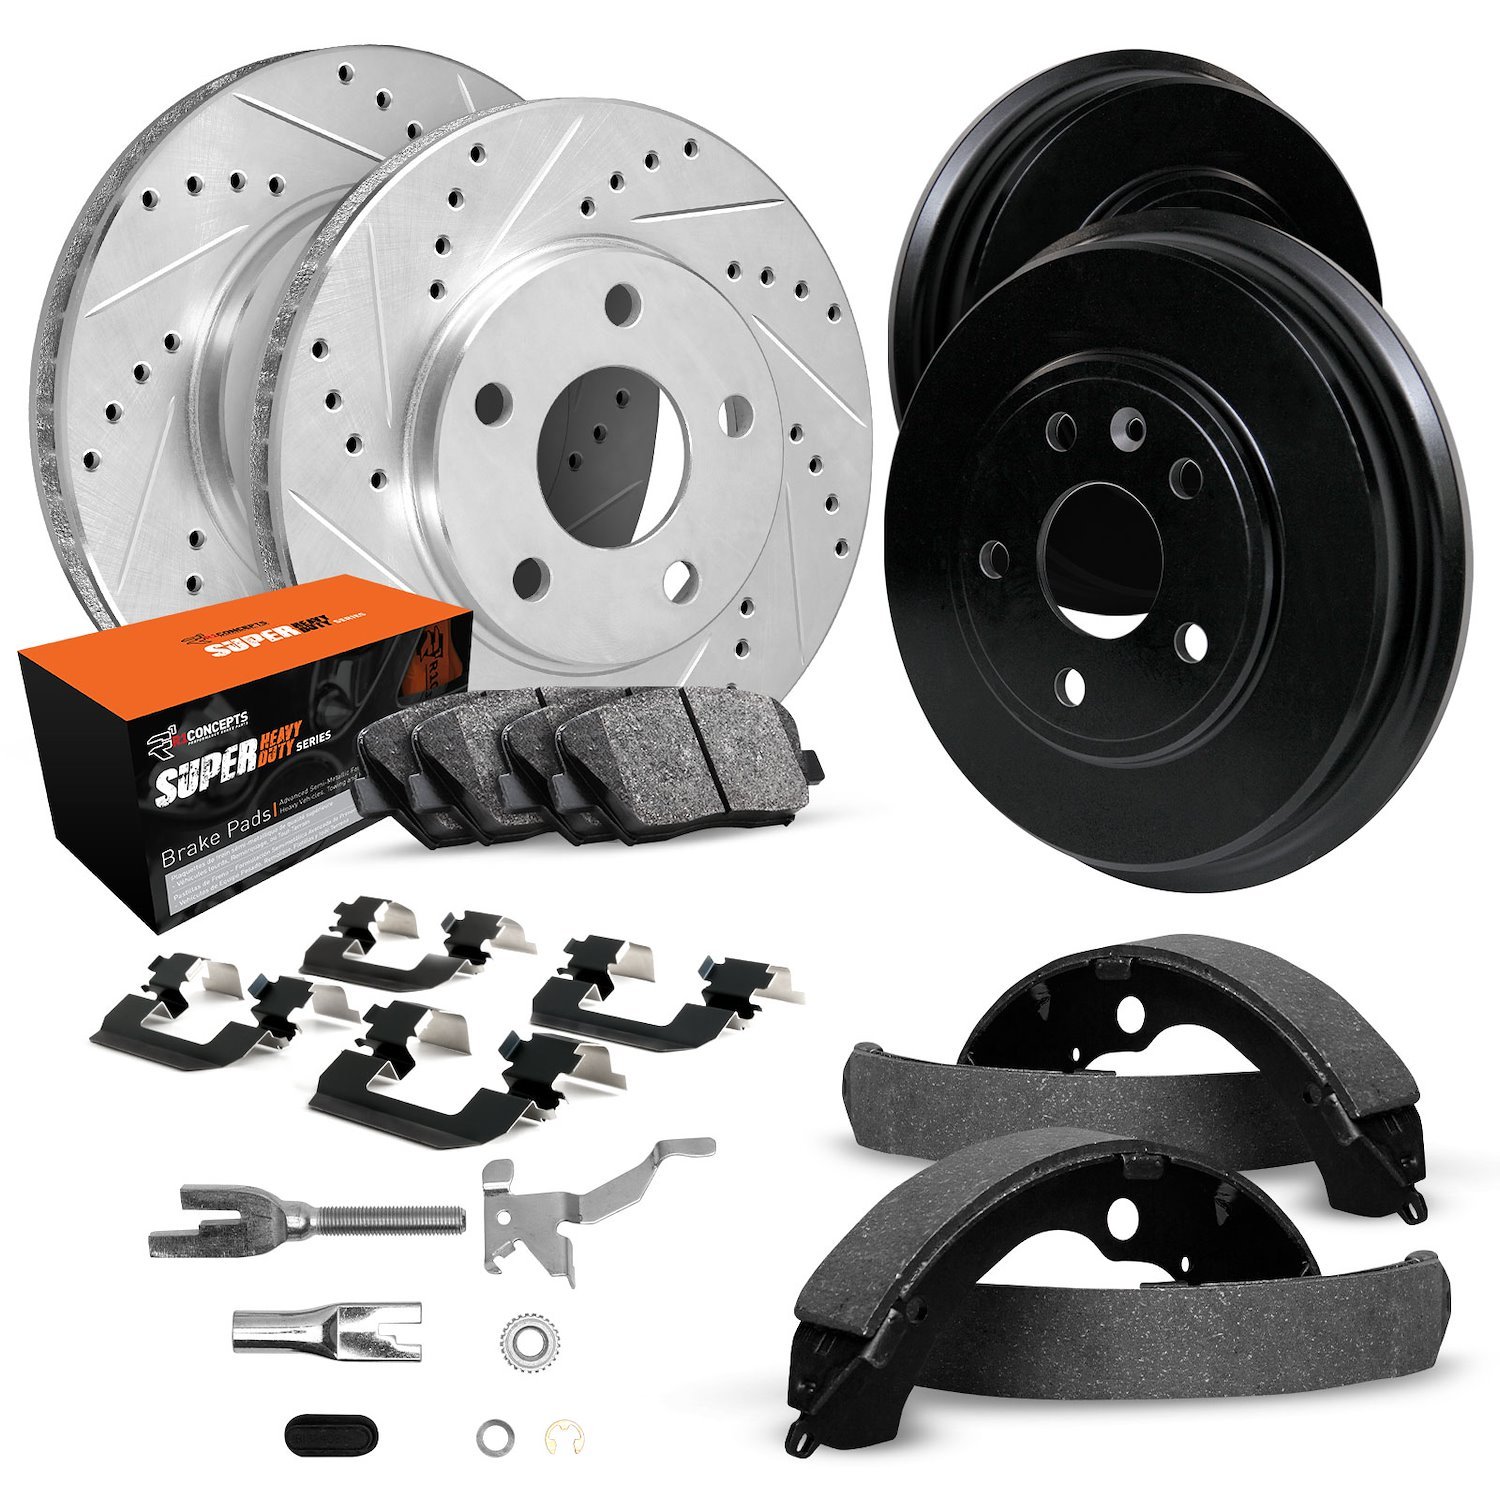 E-Line Drilled/Slotted Silver Rotor & Drum Set w/Super-Duty Pads, Shoes/Hardware/Adjusters, 1983-1991 Ford/Lincoln/Mercury/Mazda